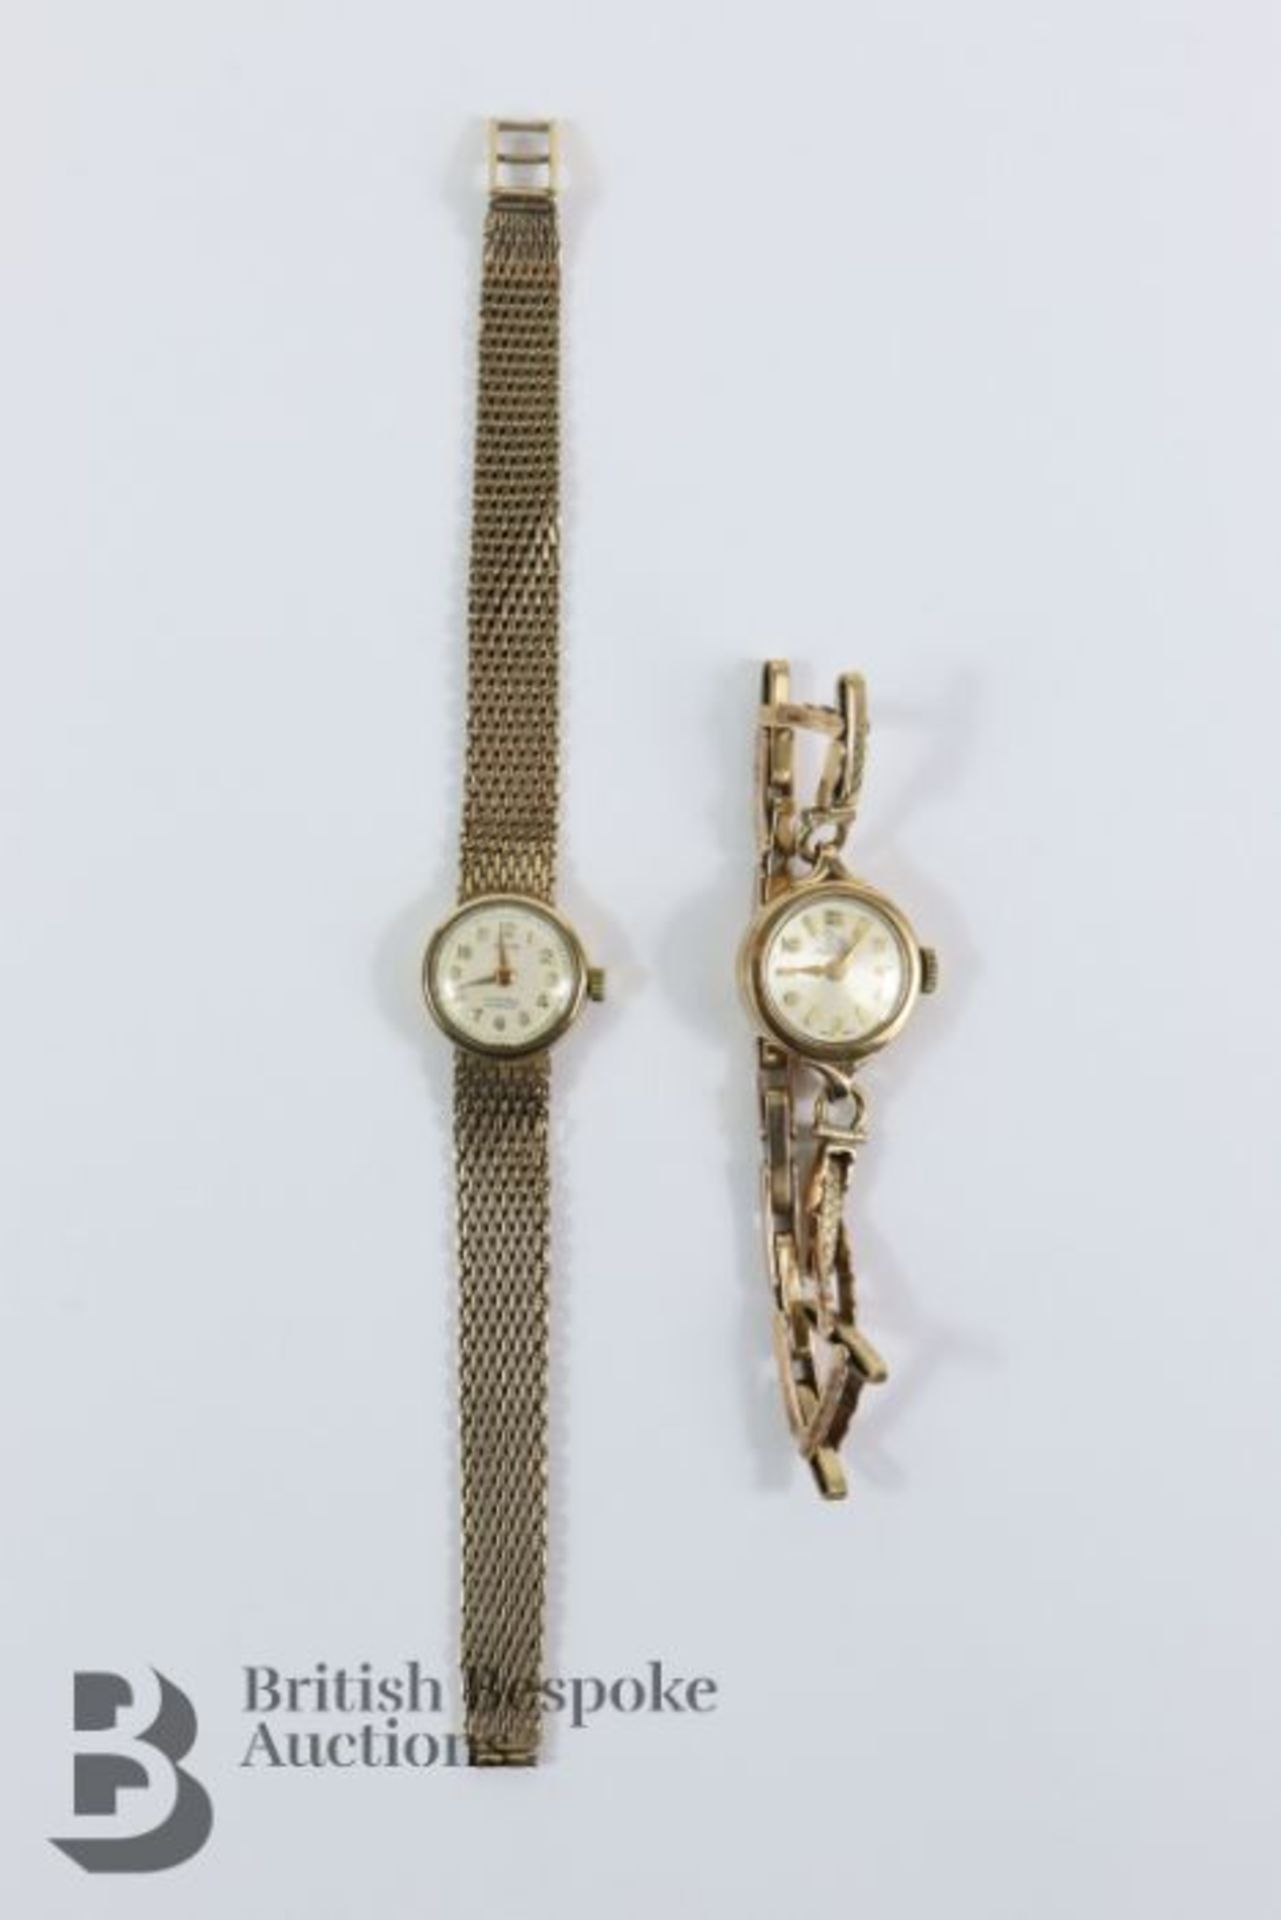 Lady's 9ct Gold Hefik Cocktail Watch - Image 3 of 3